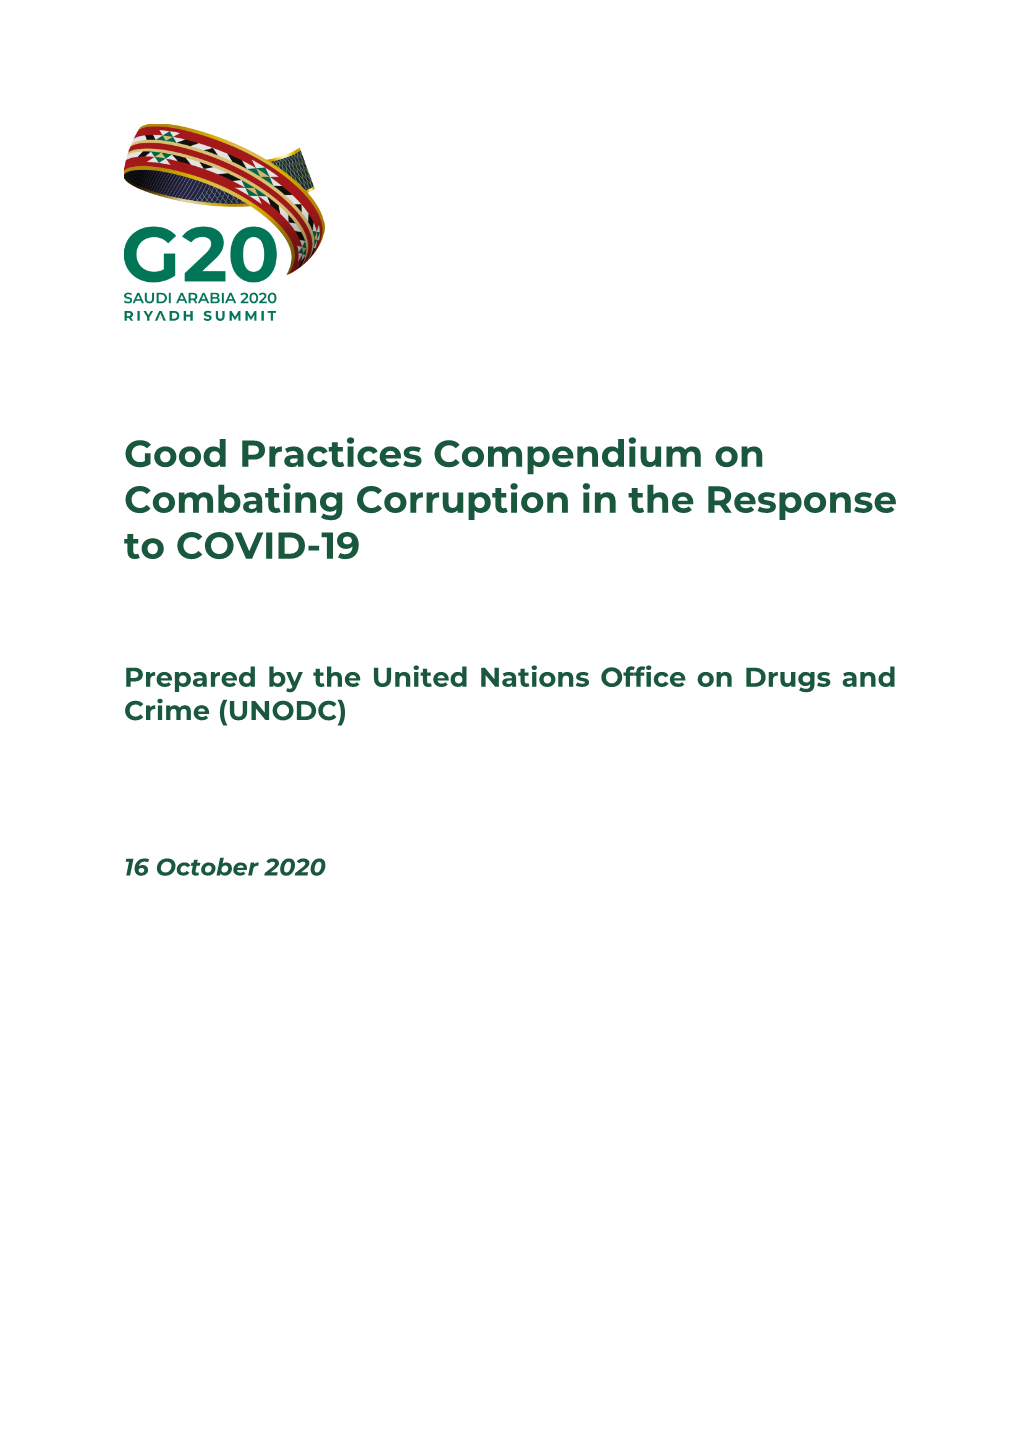 G20 Good Practices Compendium on Combating Corruption in The